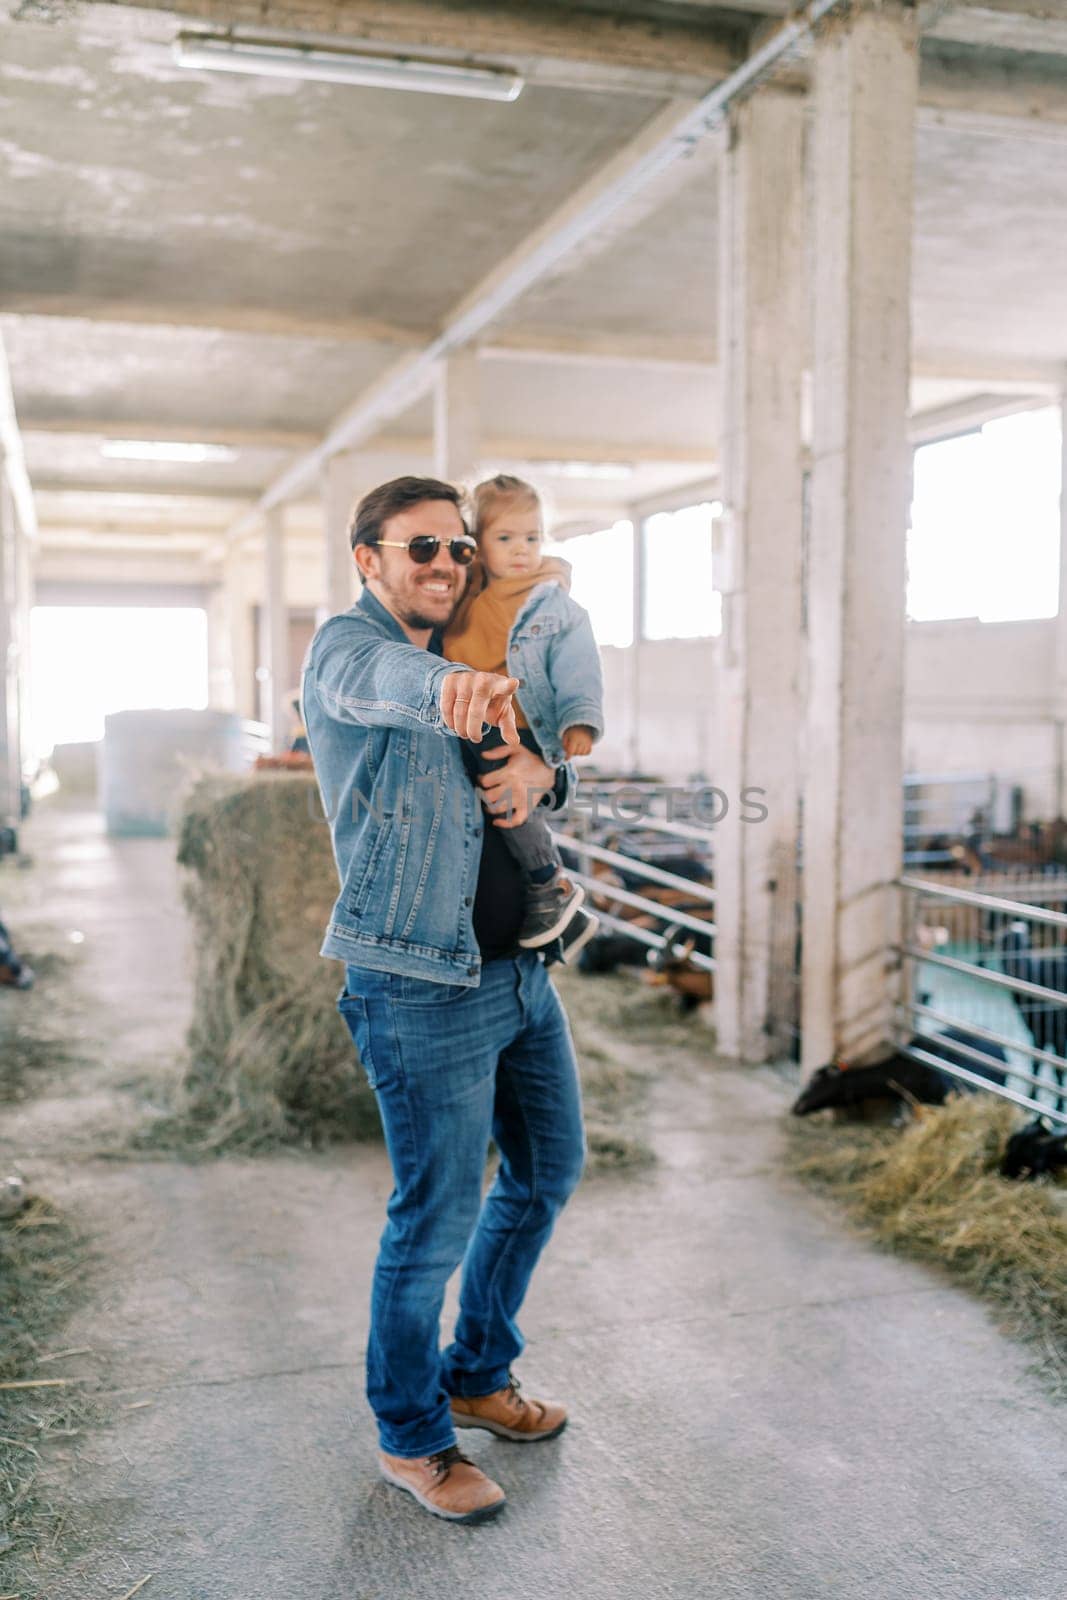 Smiling dad pointing into the distance to a little girl in his arms while standing on a farm. High quality photo